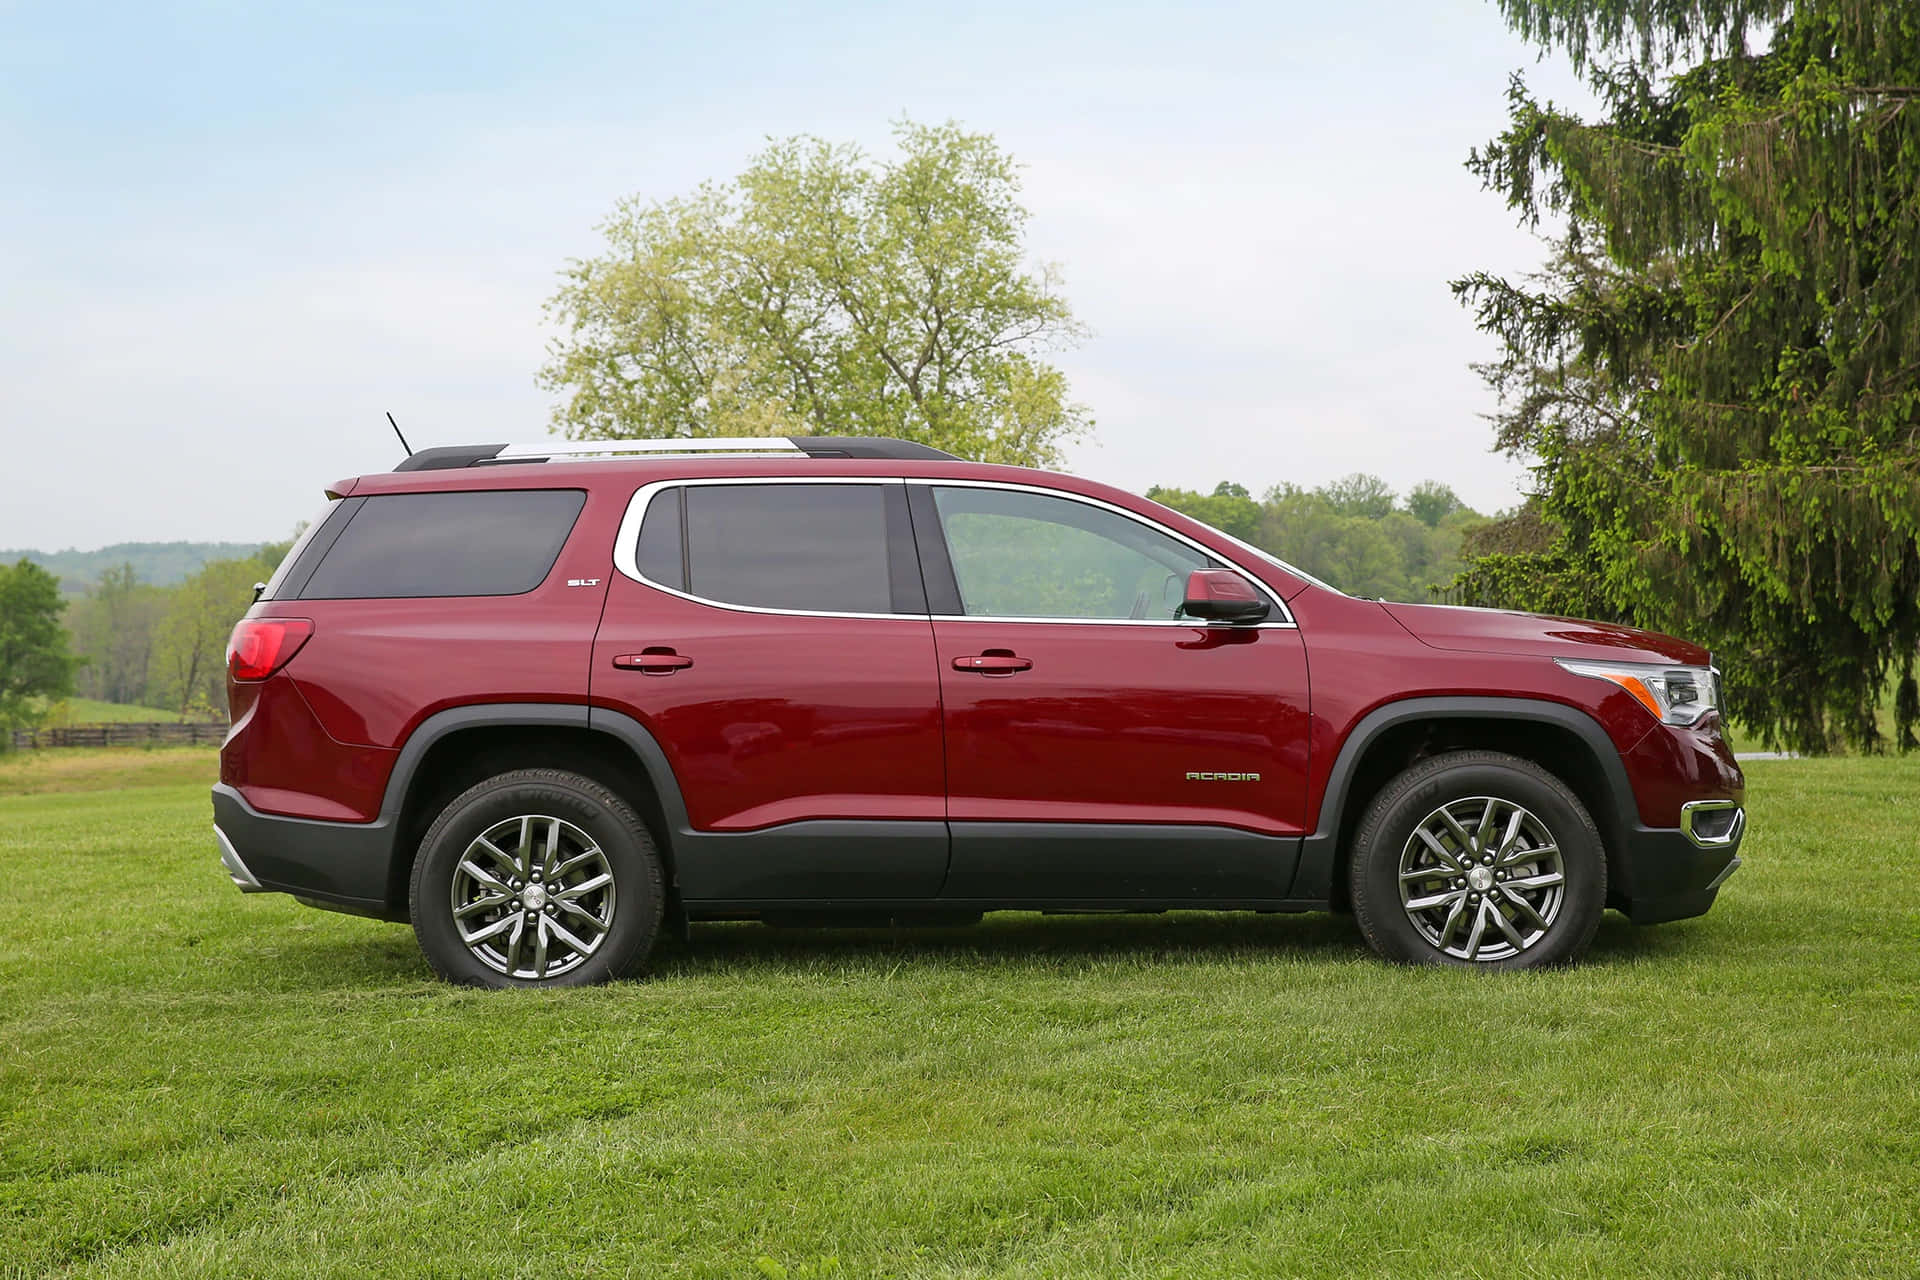 GMC Acadia driving on a scenic road Wallpaper